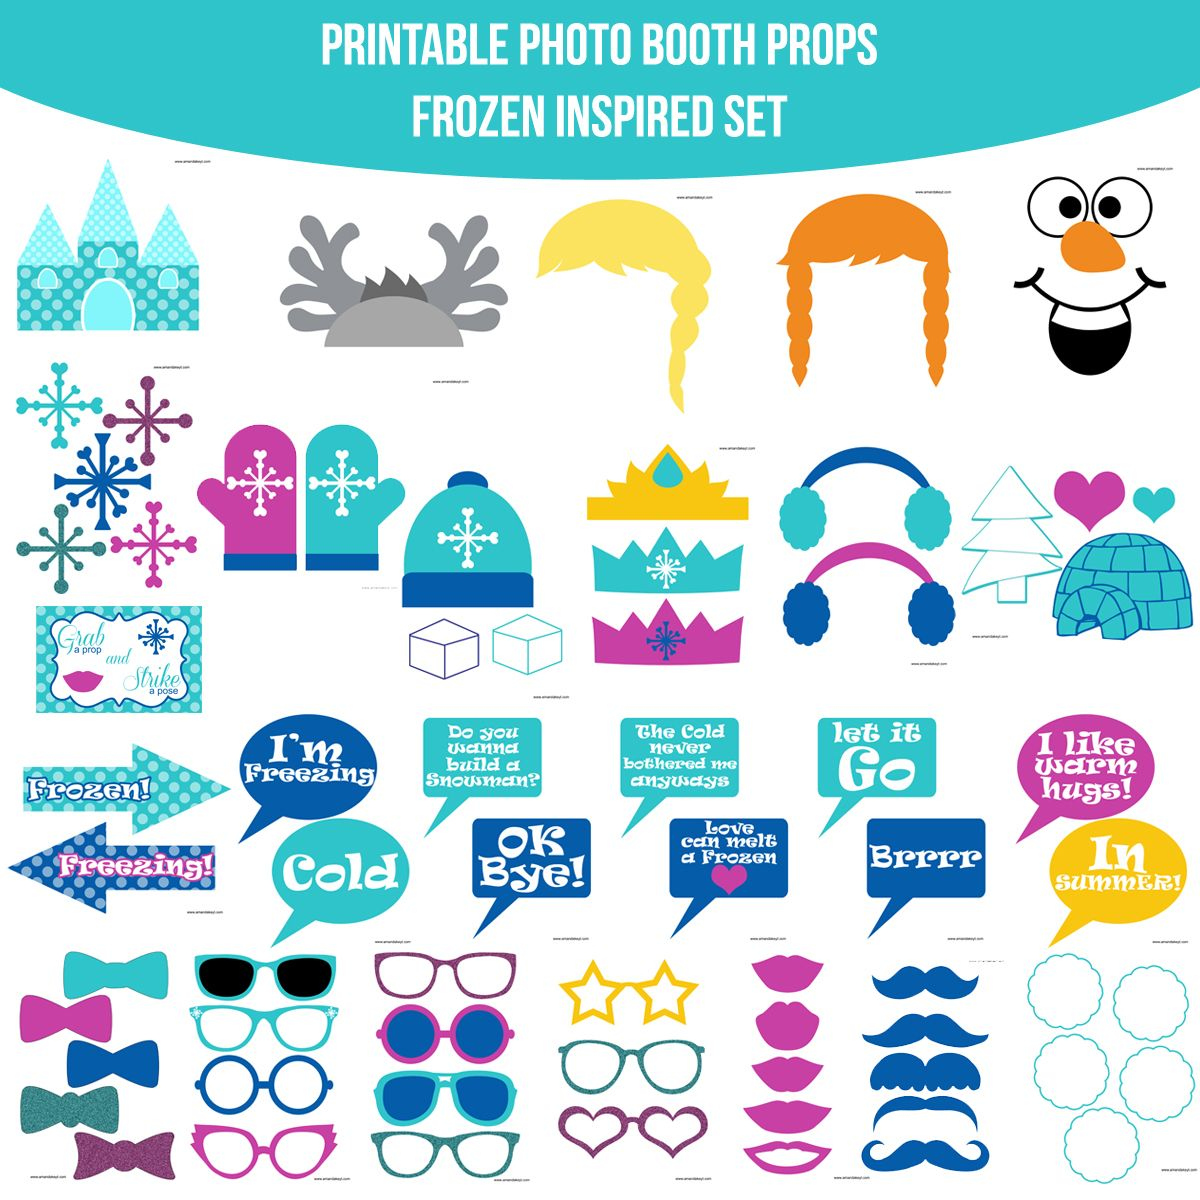 Instant Download Frozen Inspired Printable Photo Booth Prop Set with Free Printable Frozen Photo Booth Props